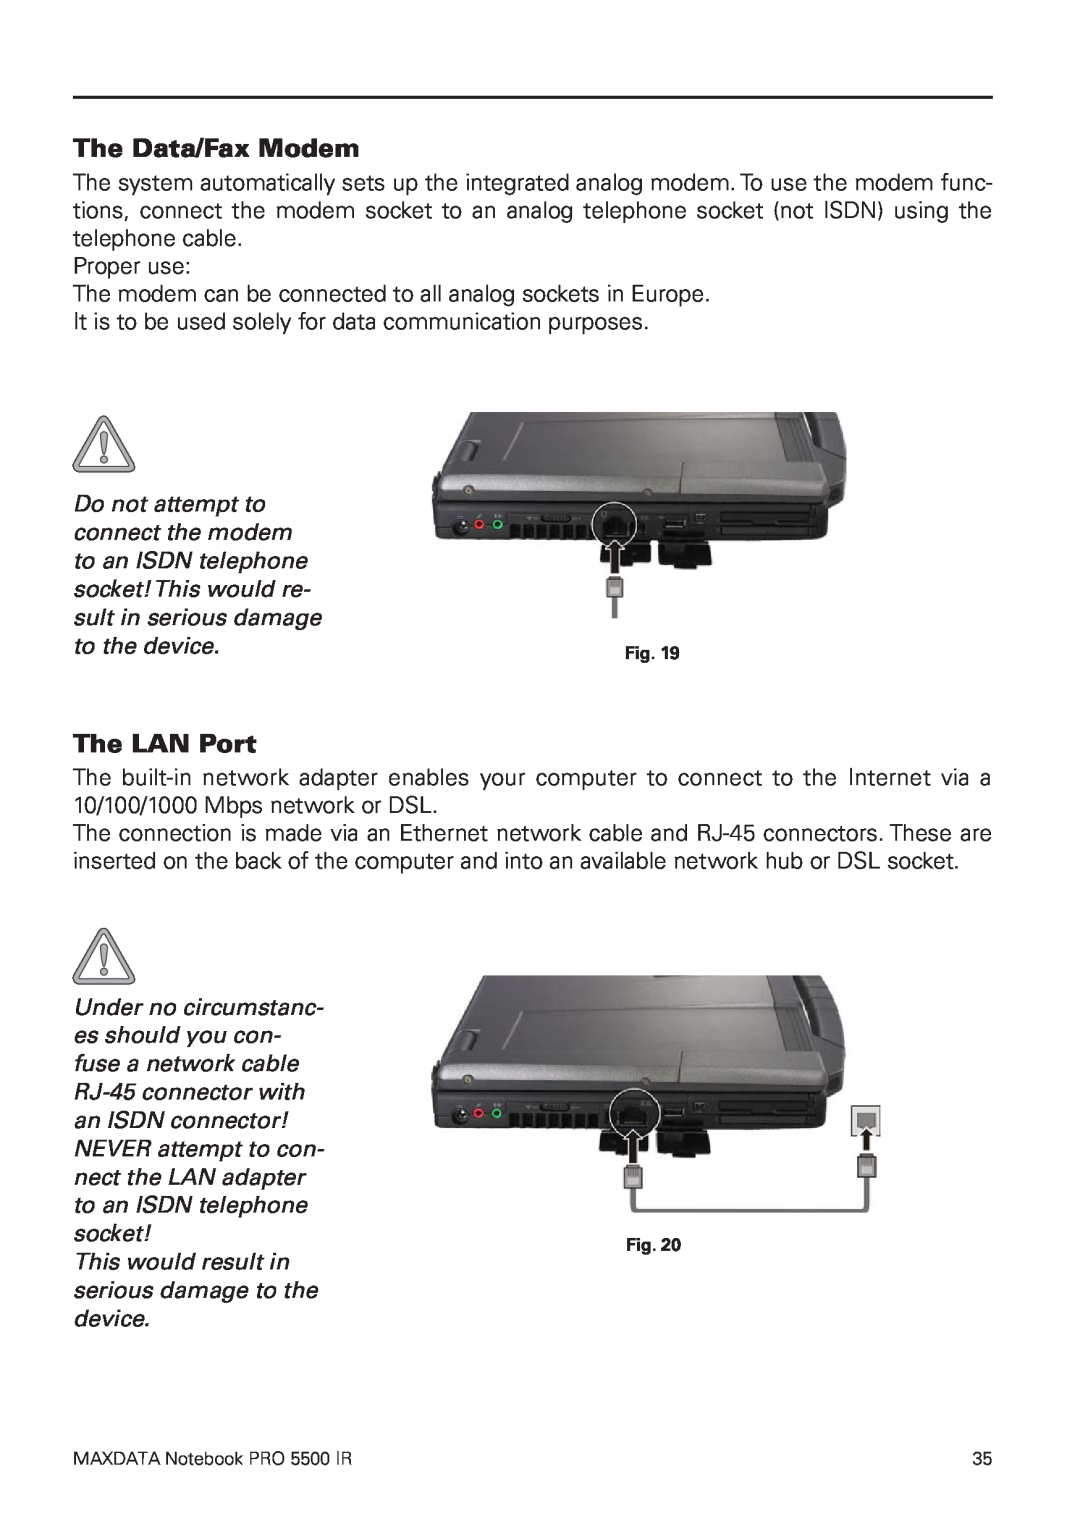 MAXDATA 5500 IR user manual The Data/Fax Modem, The LAN Port, Do not attempt to, connect the modem, to an ISDN telephone 